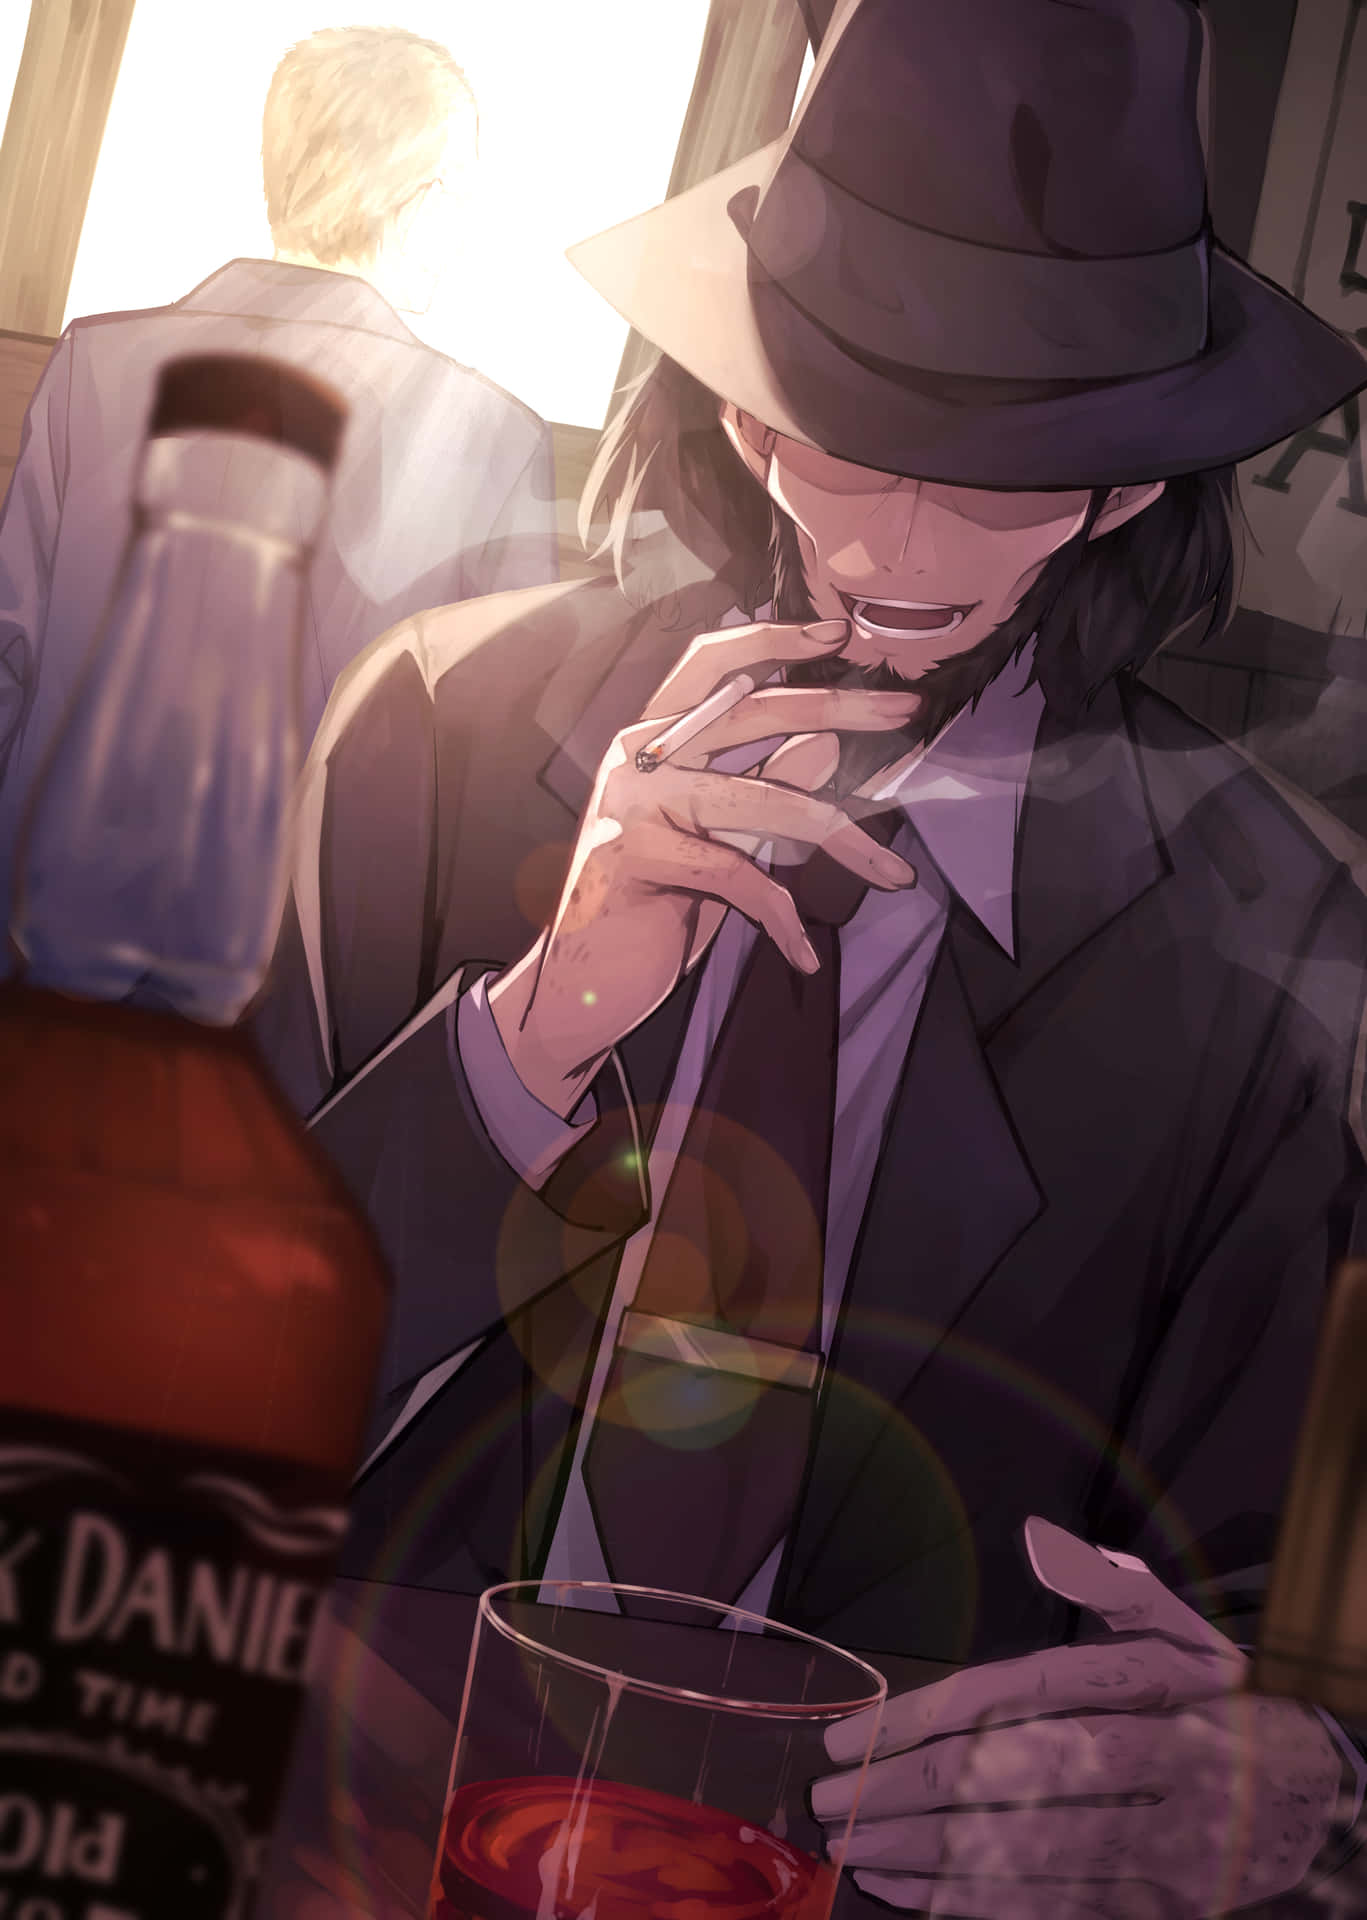 Stylish Daisuke Jigen with his iconic hat and cigarette in Lupin III Wallpaper